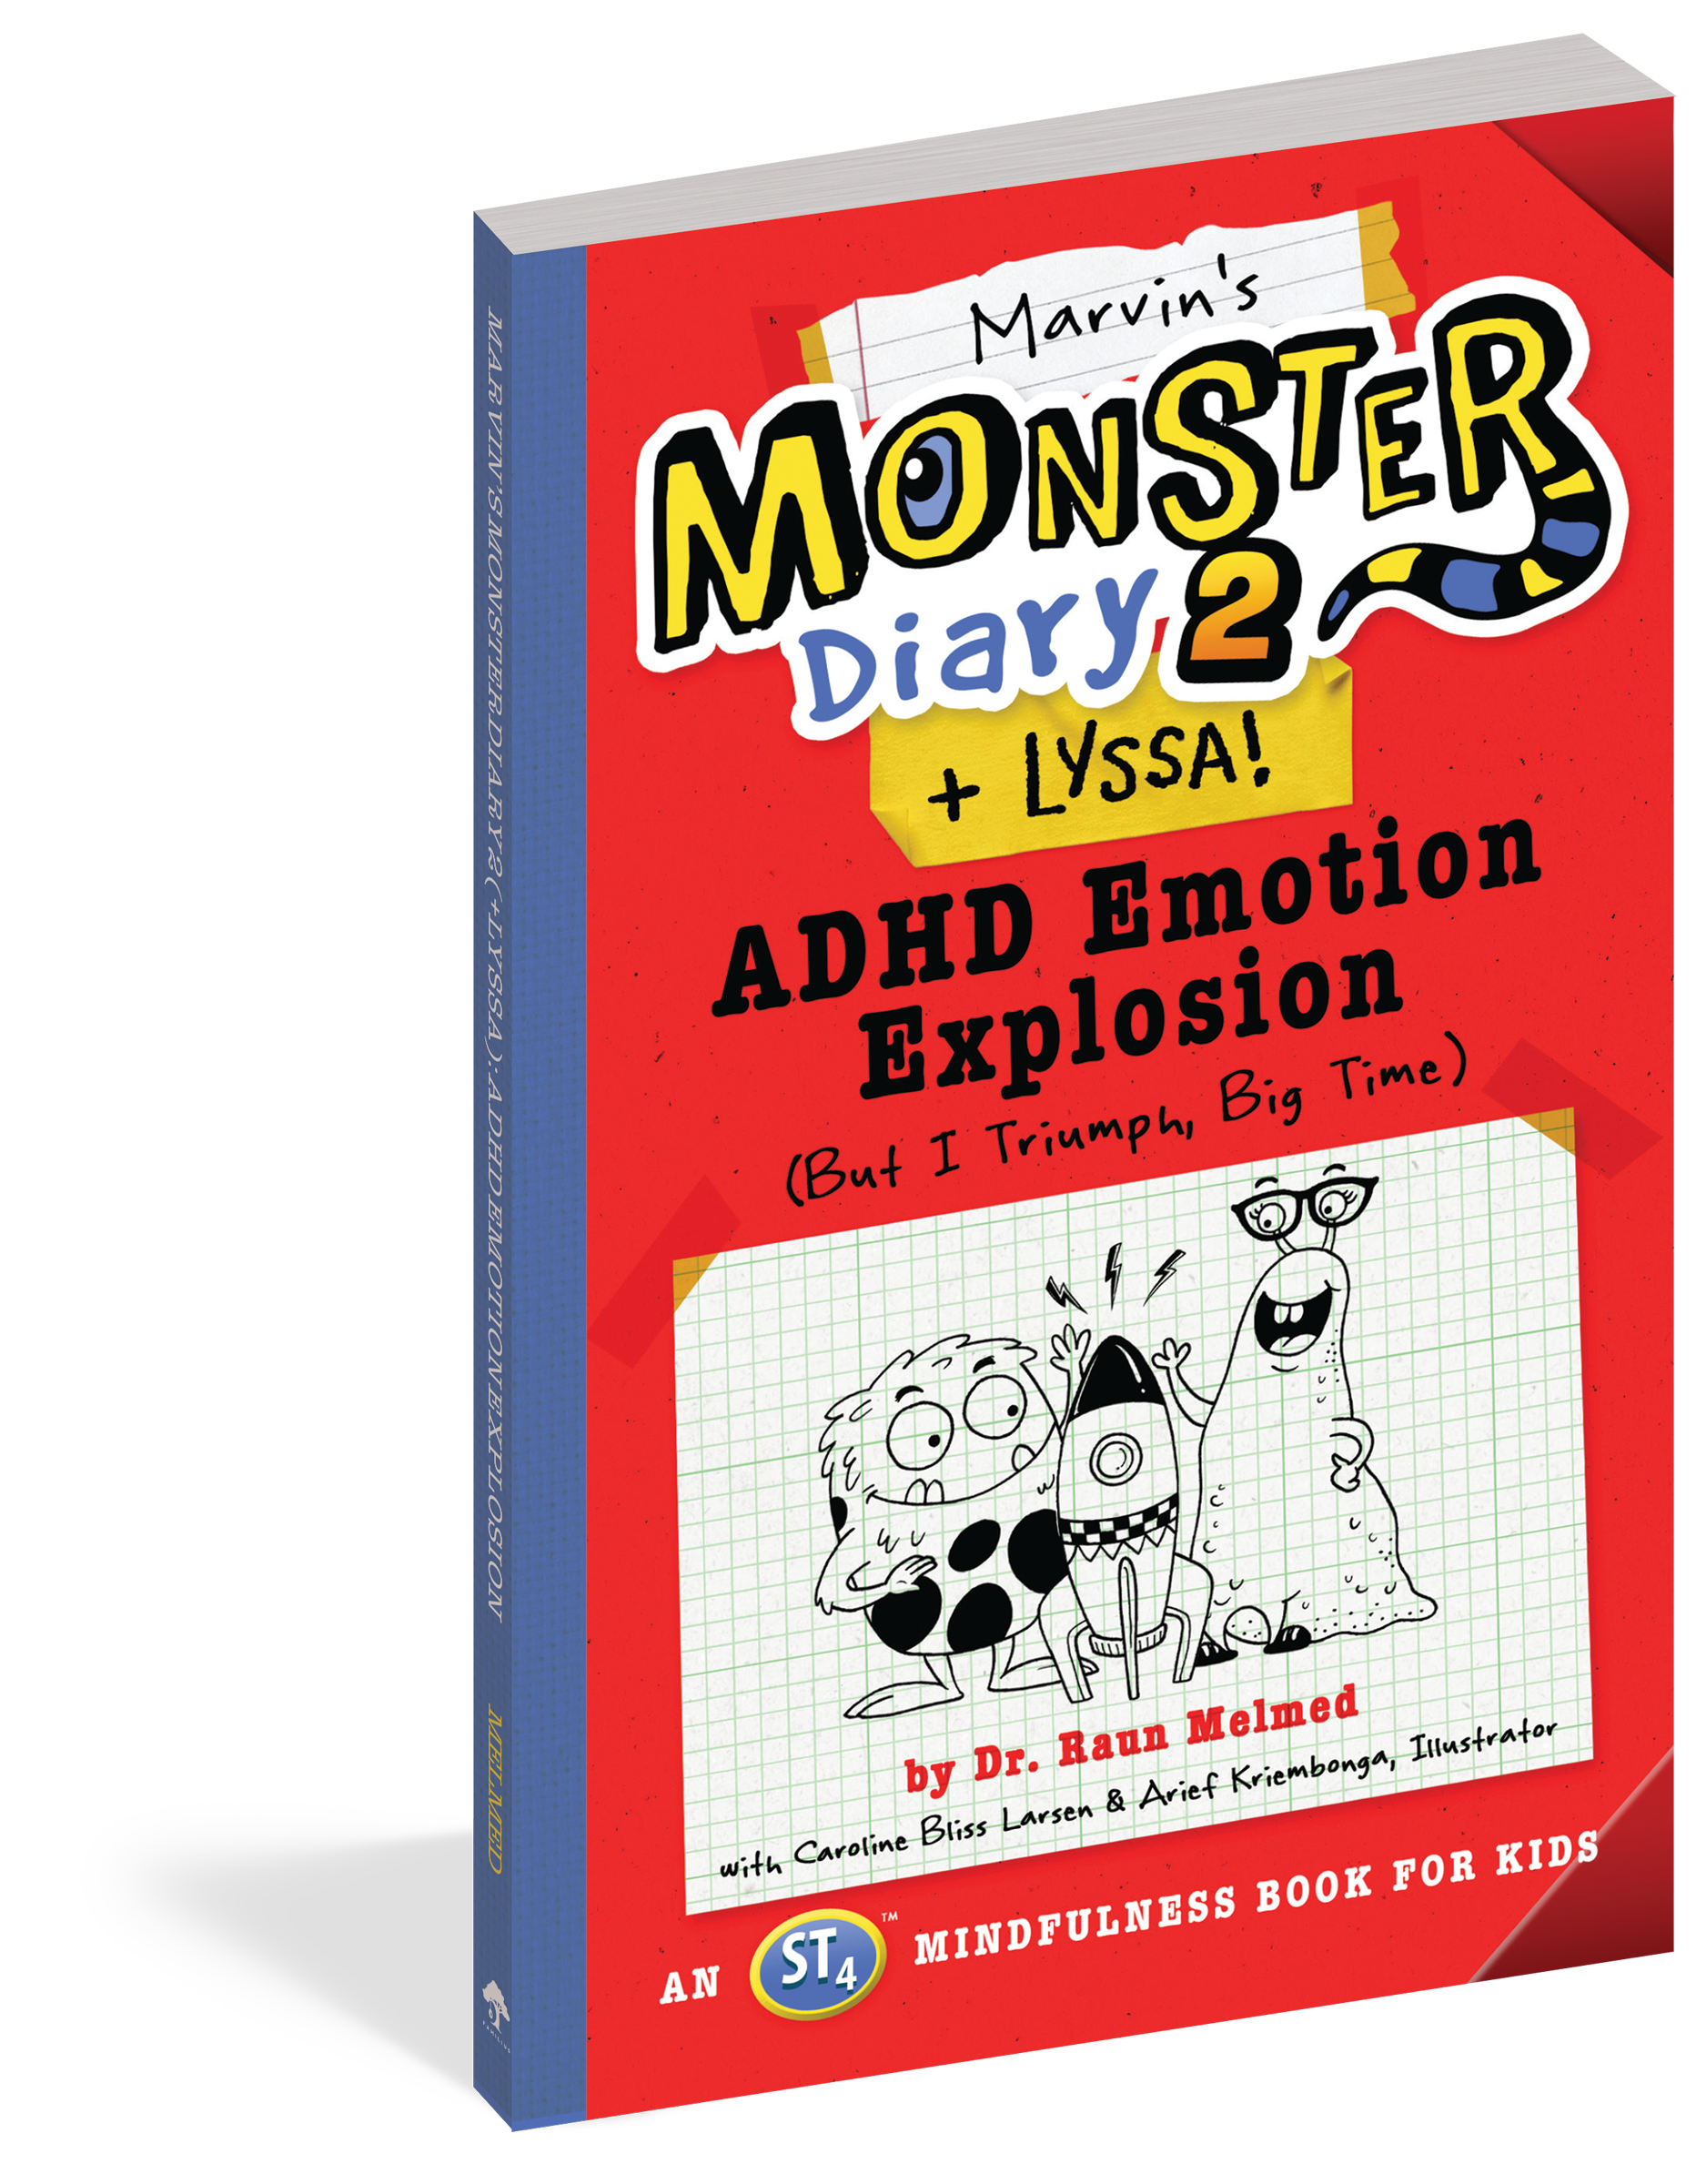 The cover of the chapter book Marvin's Monster Diary 2 (+ Lyssa).